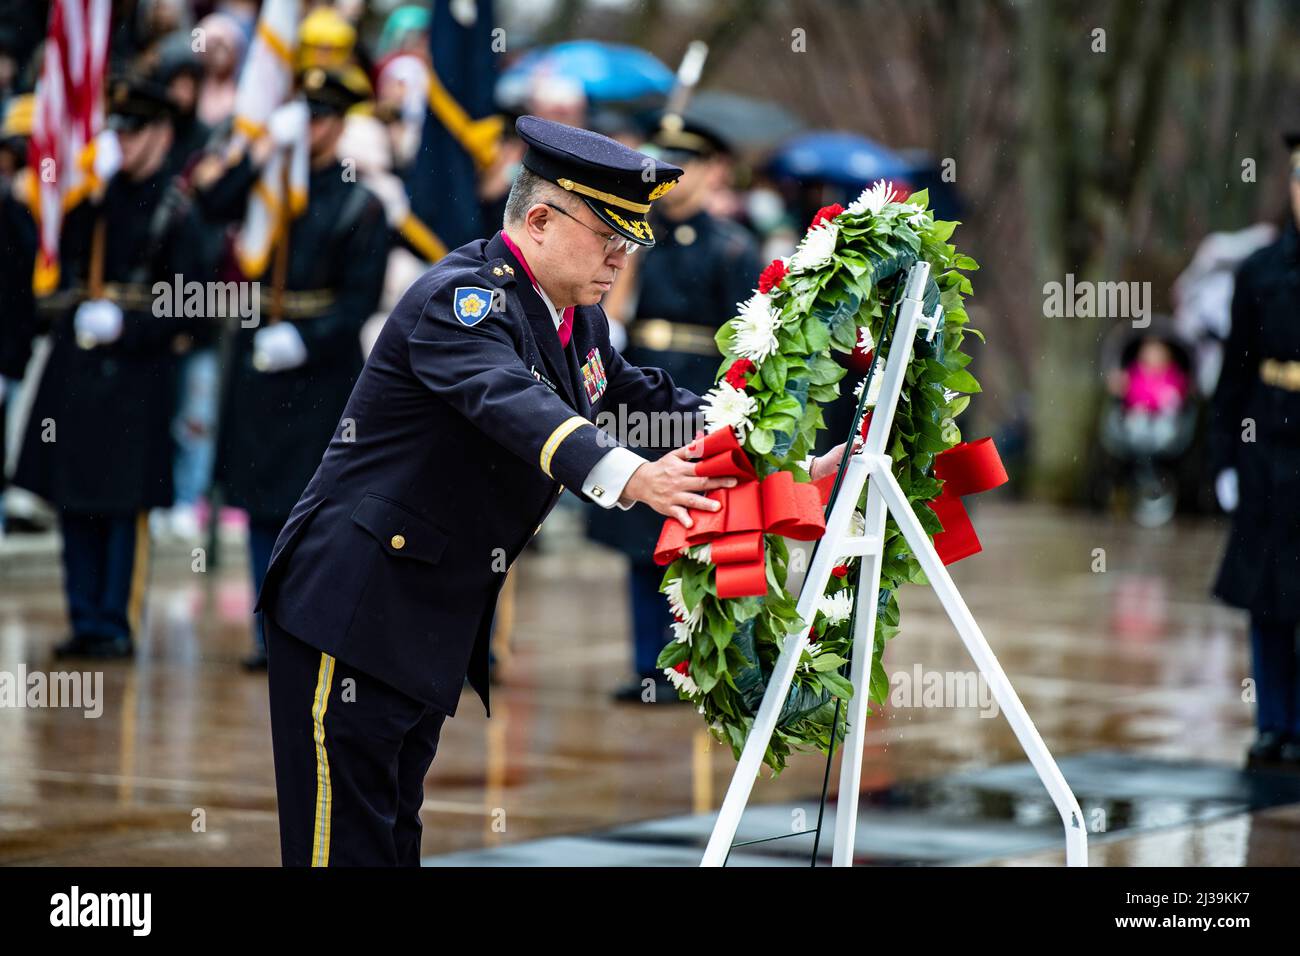 Arlington, United States Of America. 05th Apr, 2022. Arlington, United States of America. 05 April, 2022. Japanese Gen. Yoshida Yoshihide, chief of staff, Japan Ground Self-Defense Force participates in an army full honors wreath-laying ceremony at the Tomb of the Unknown Soldier, Arlington National Cemetery, April 5, 2022 in Arlington, Virginia, USA. Credit: Elizabeth Fraser/U.S. Army/Alamy Live News Stock Photo